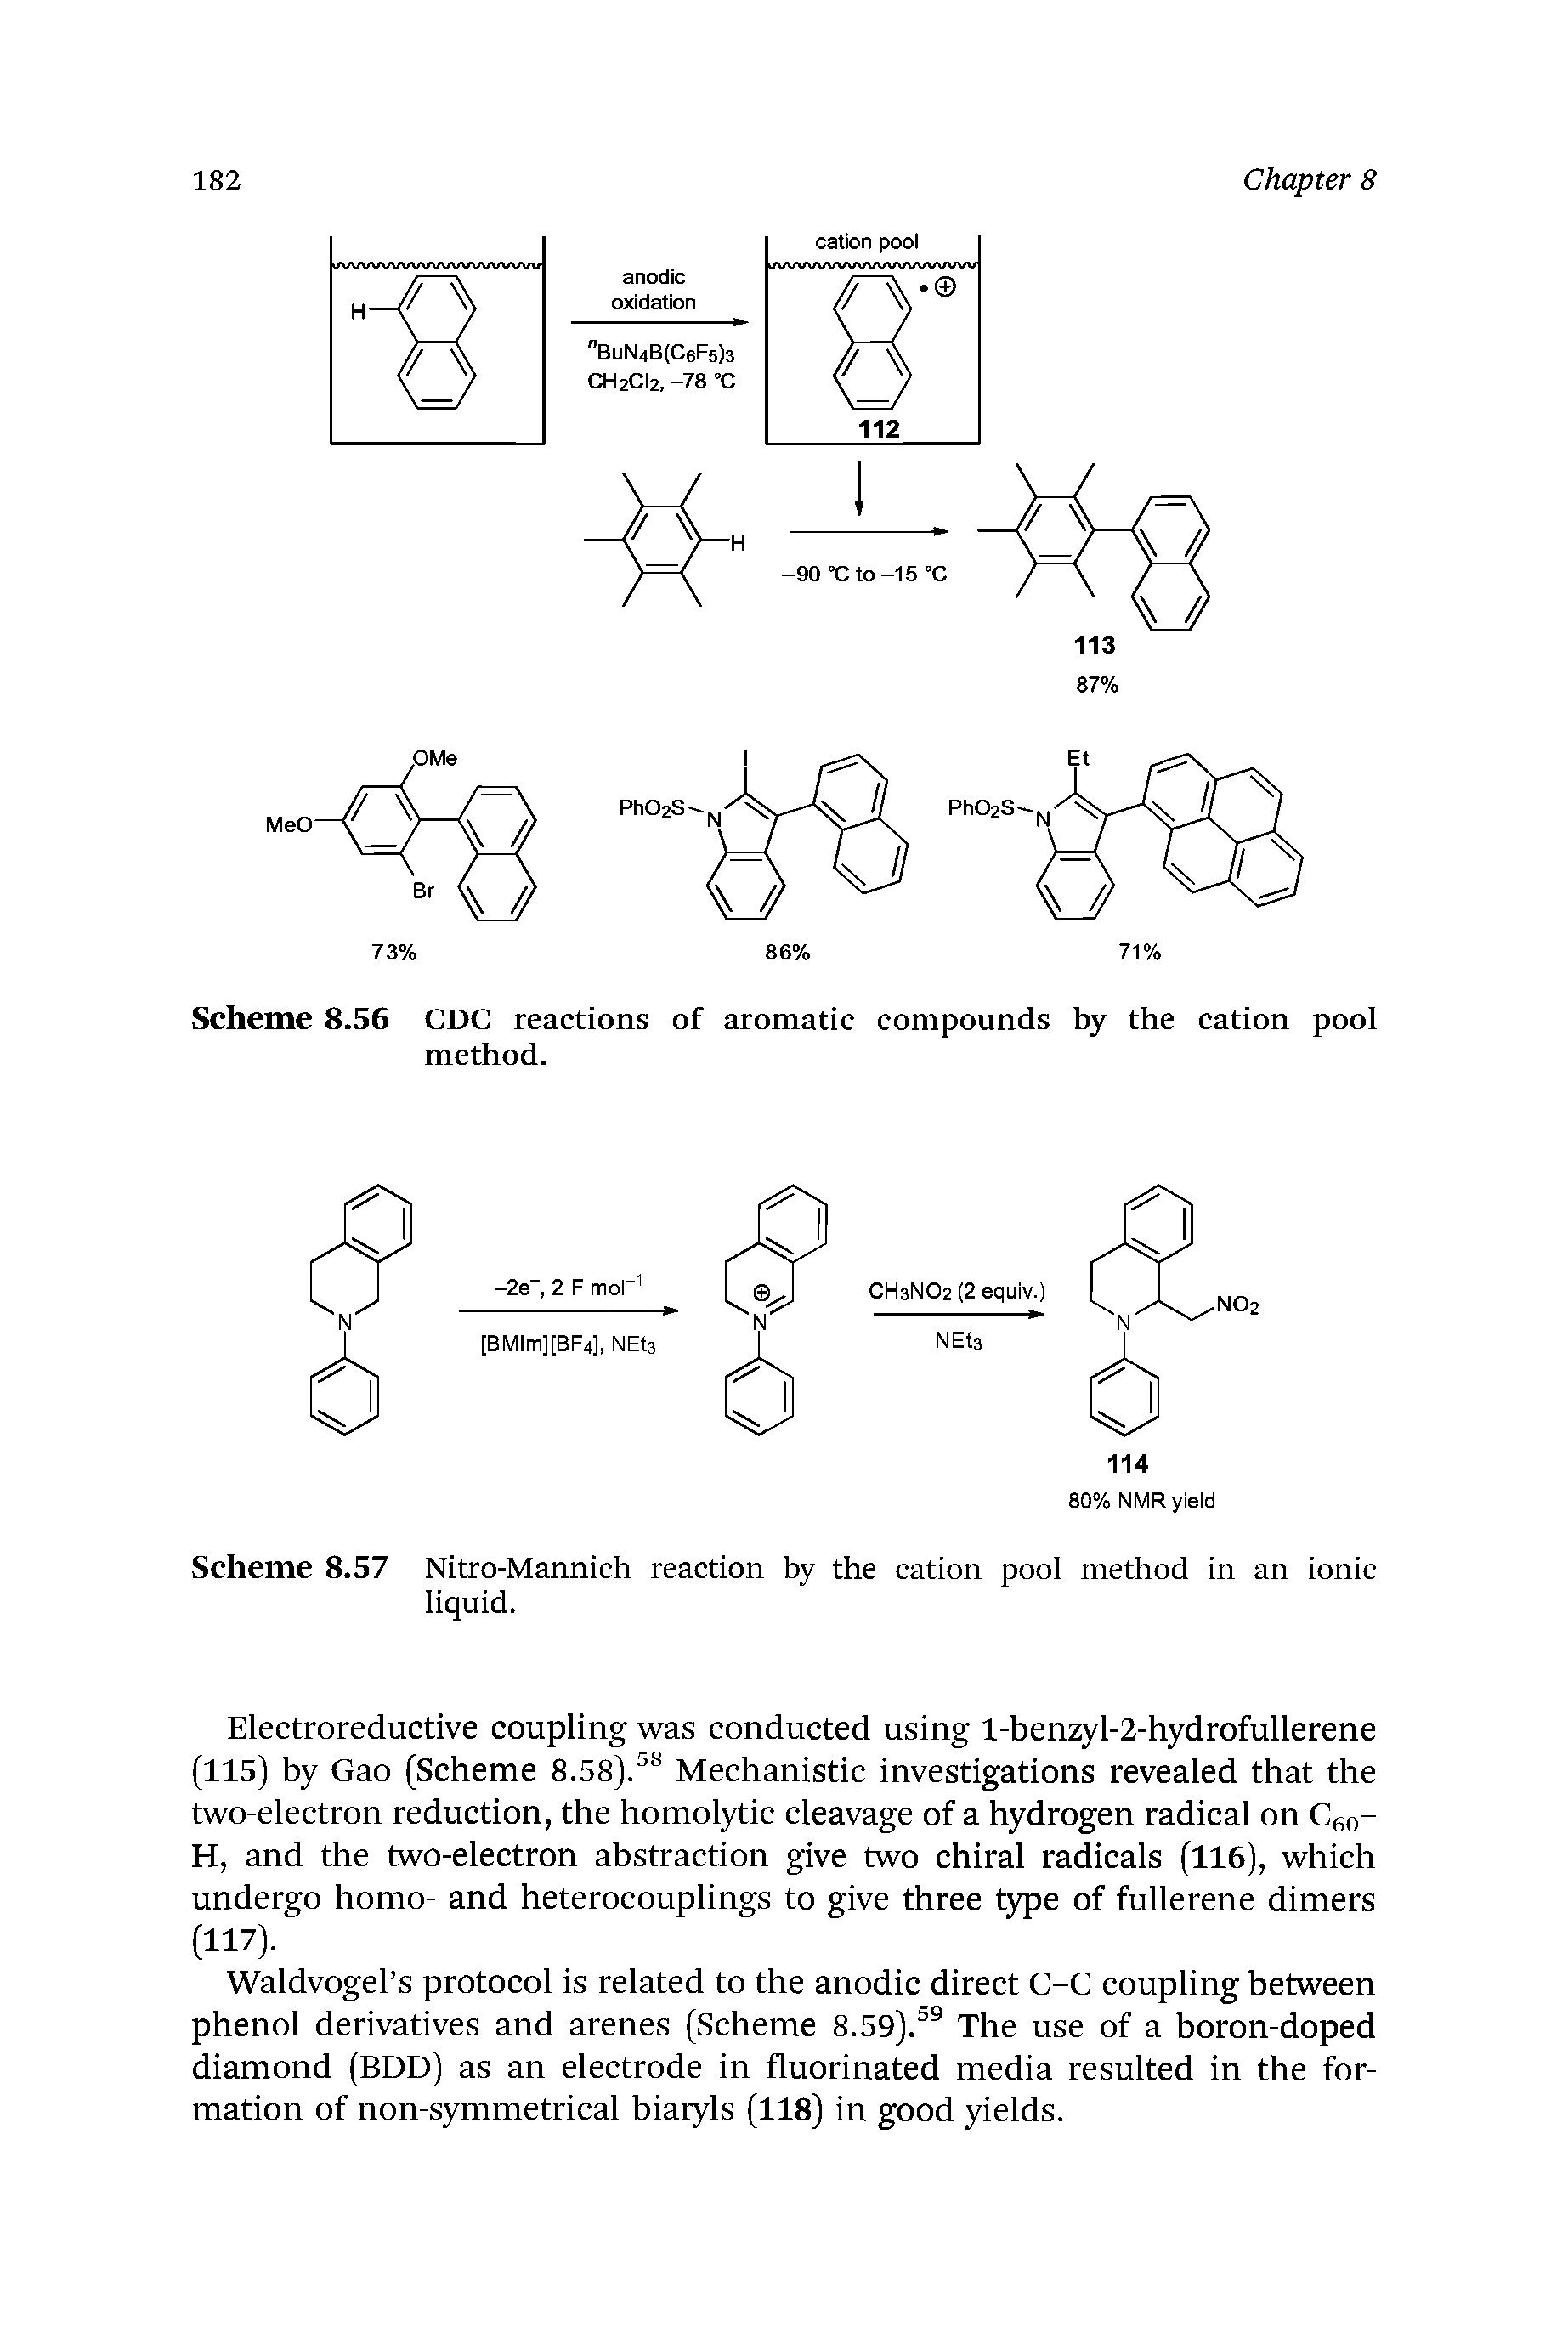 Scheme 8.57 Nitro-Mannich reaction by the cation pool method in an ionic liquid.